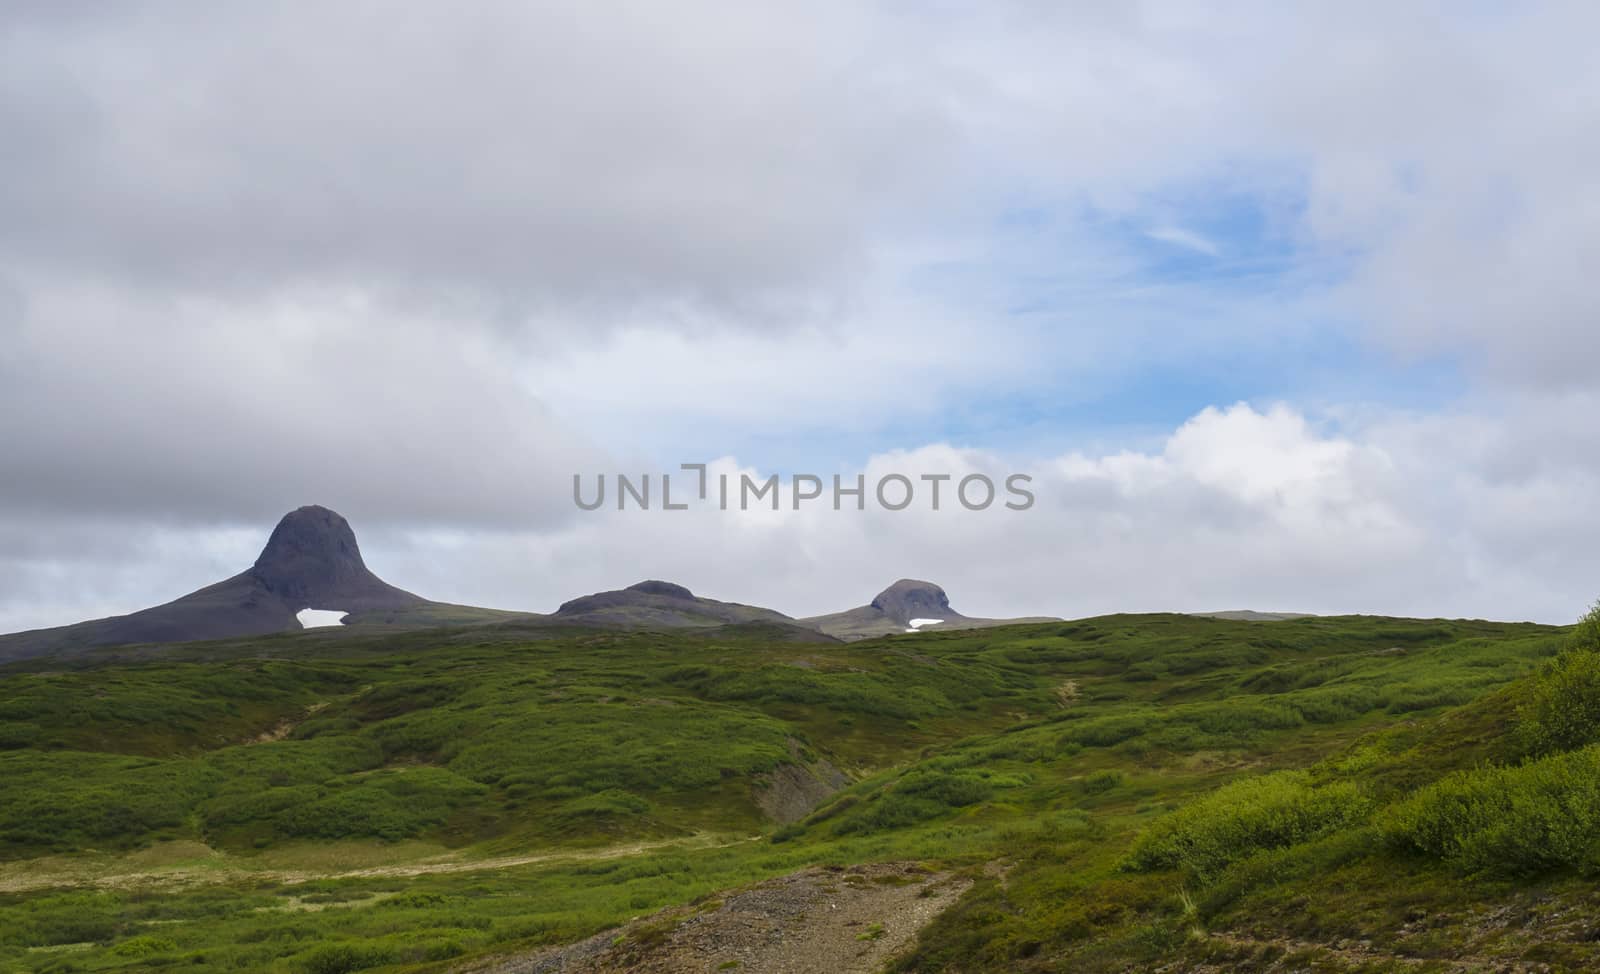 Hat shape mountains with snow capes, green hills and grass meadow, blue sky white clouds, Iceland by Henkeova